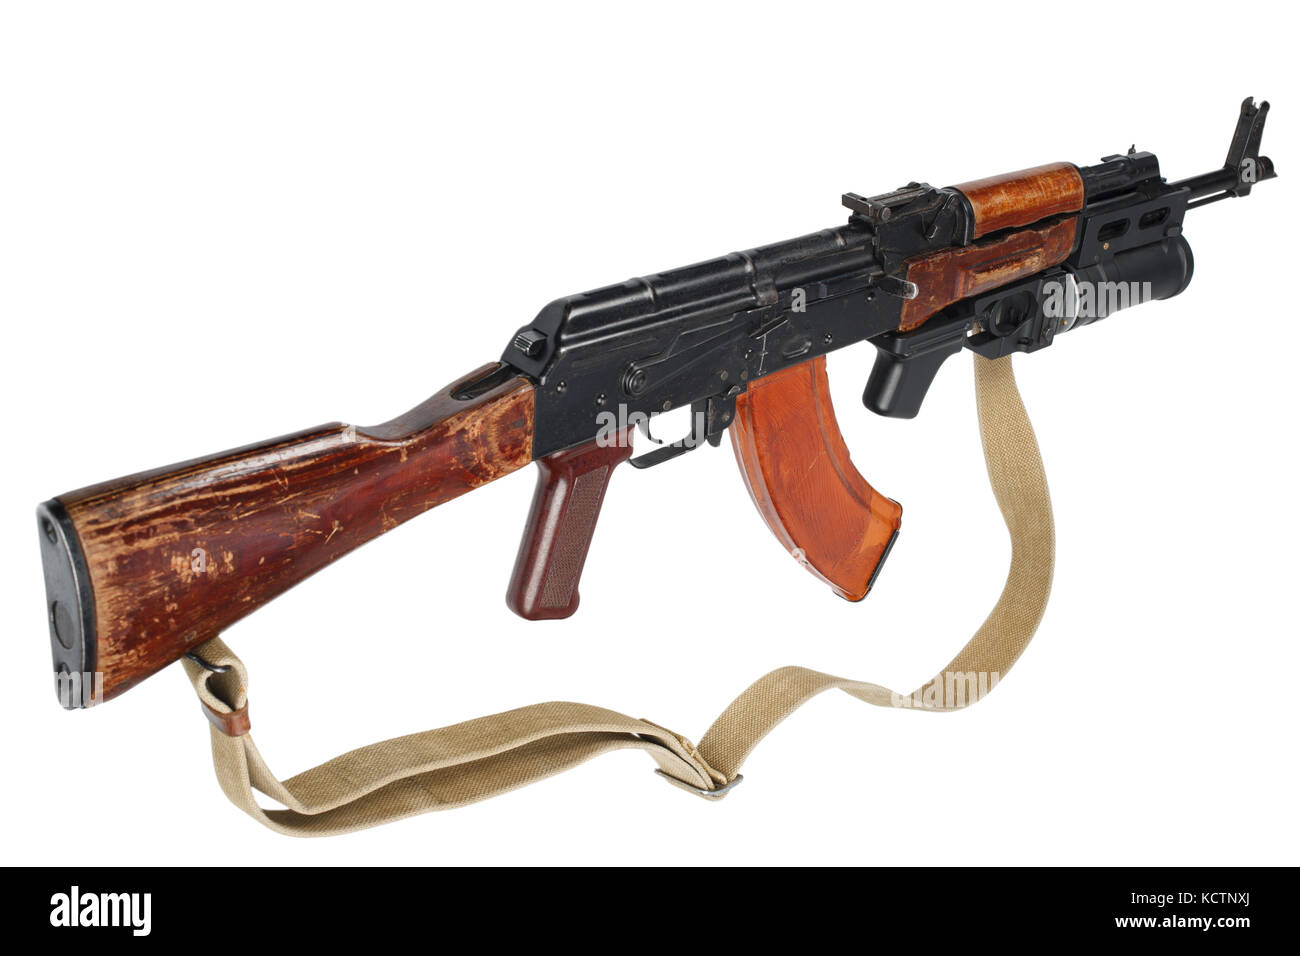 AK - 47 with underbarrel grenade launcher on white Stock Photo